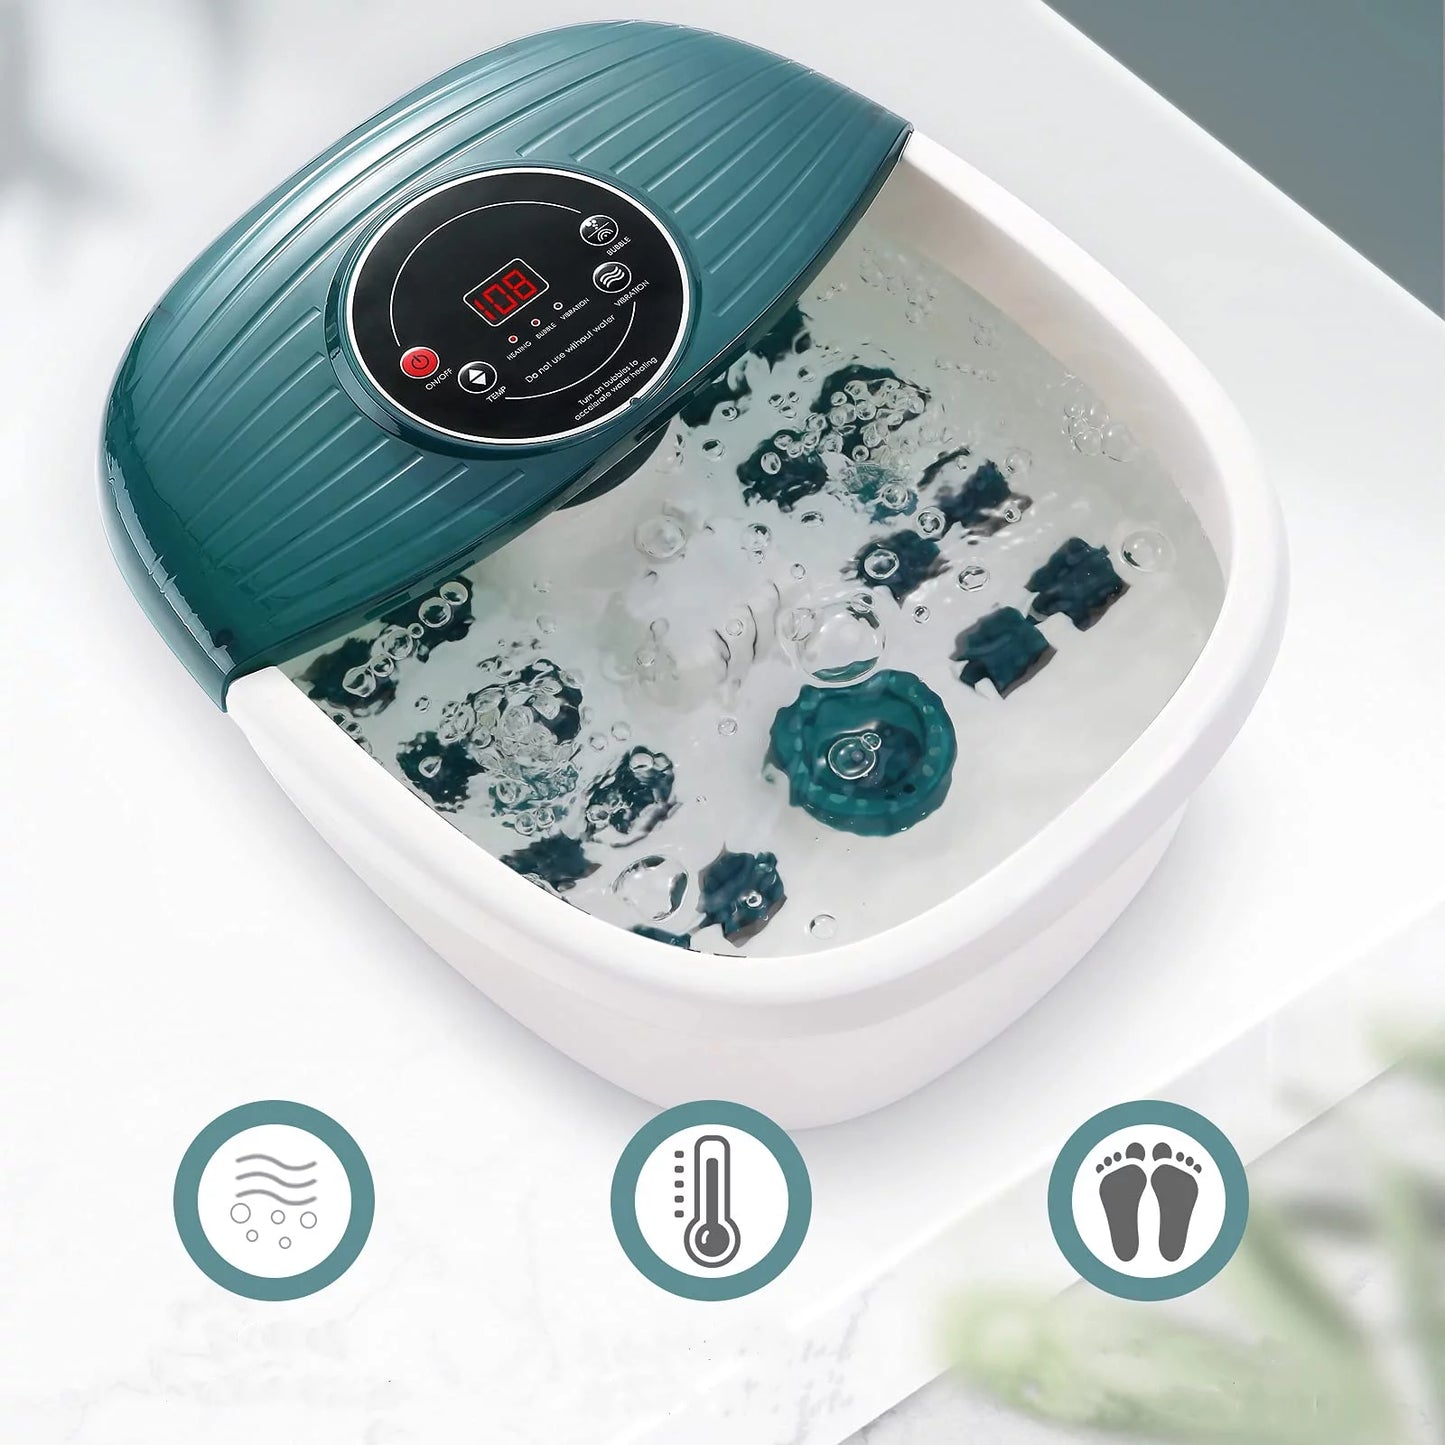 Foot Spa Bath Massager with Wireless Remote Control and 8 Automatic Shiatsu Massaging Rollers, Heating Temperature Control, Bubbles and Vibration for Home and Office Use